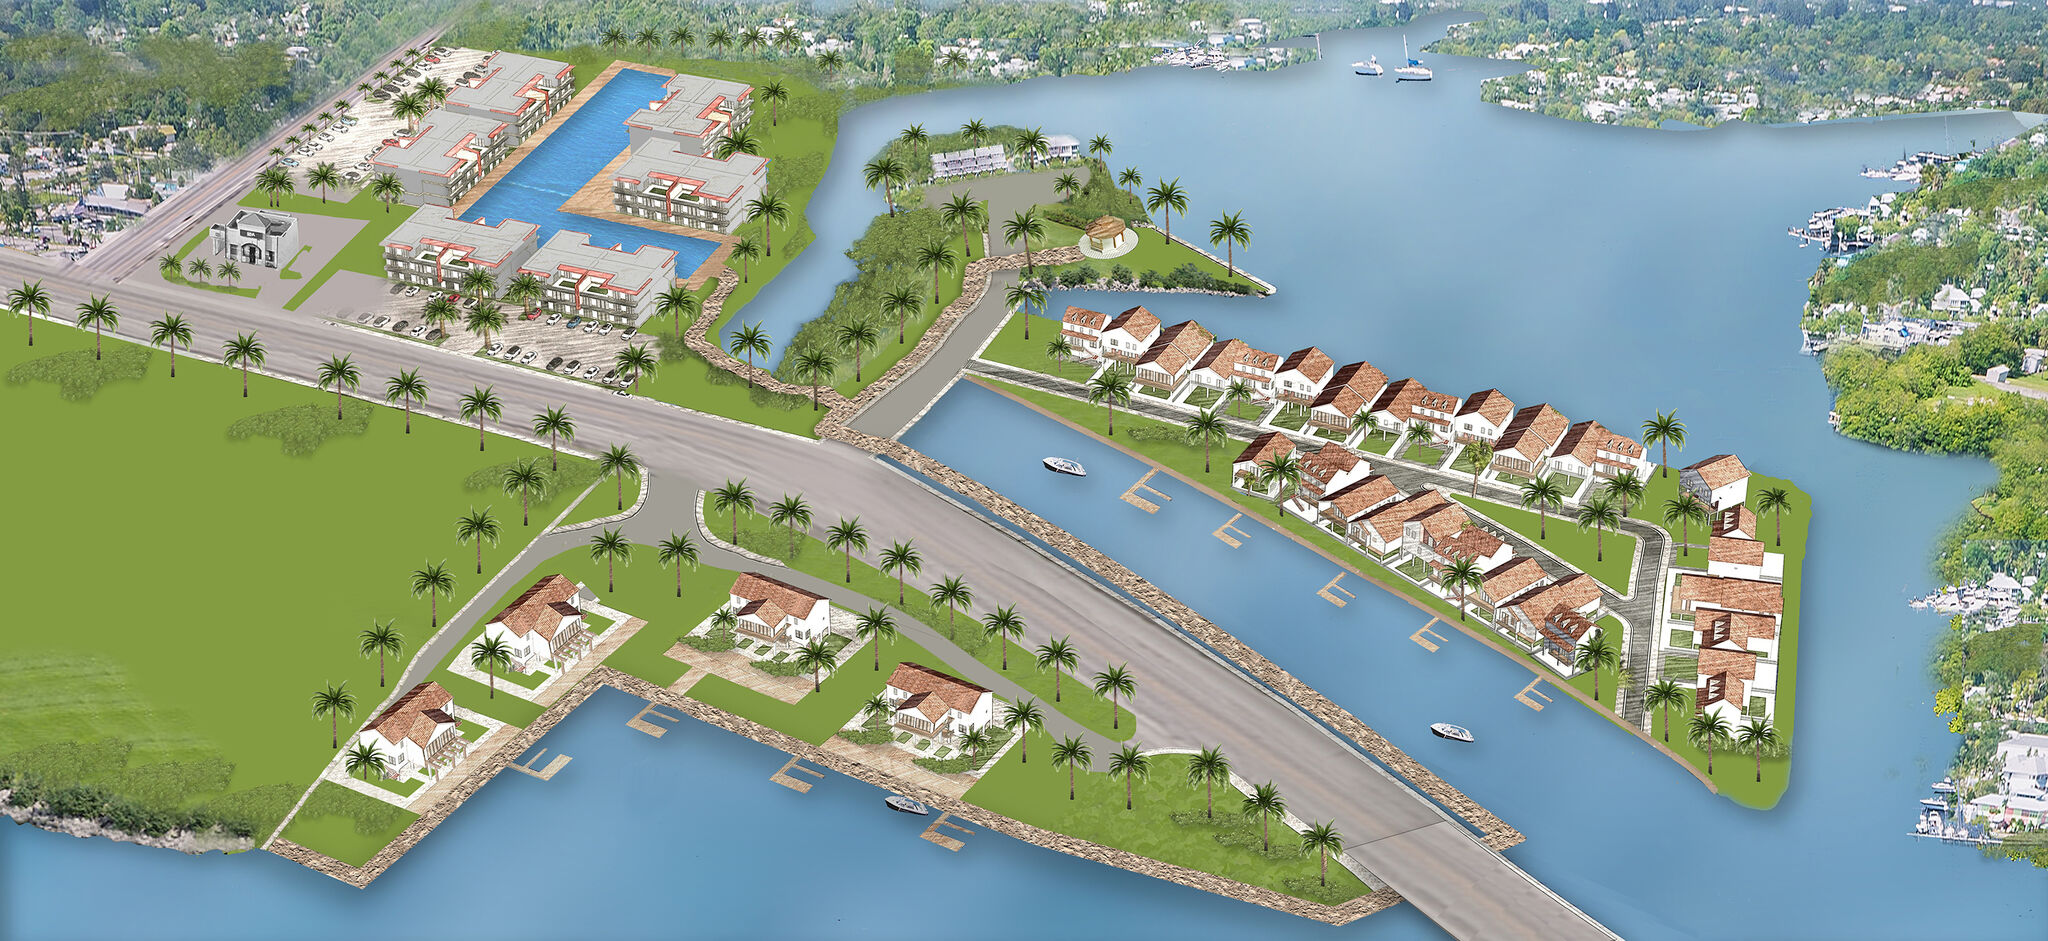 A $90 million ‘modern living’ development is coming to Houston’s Clear Lake area